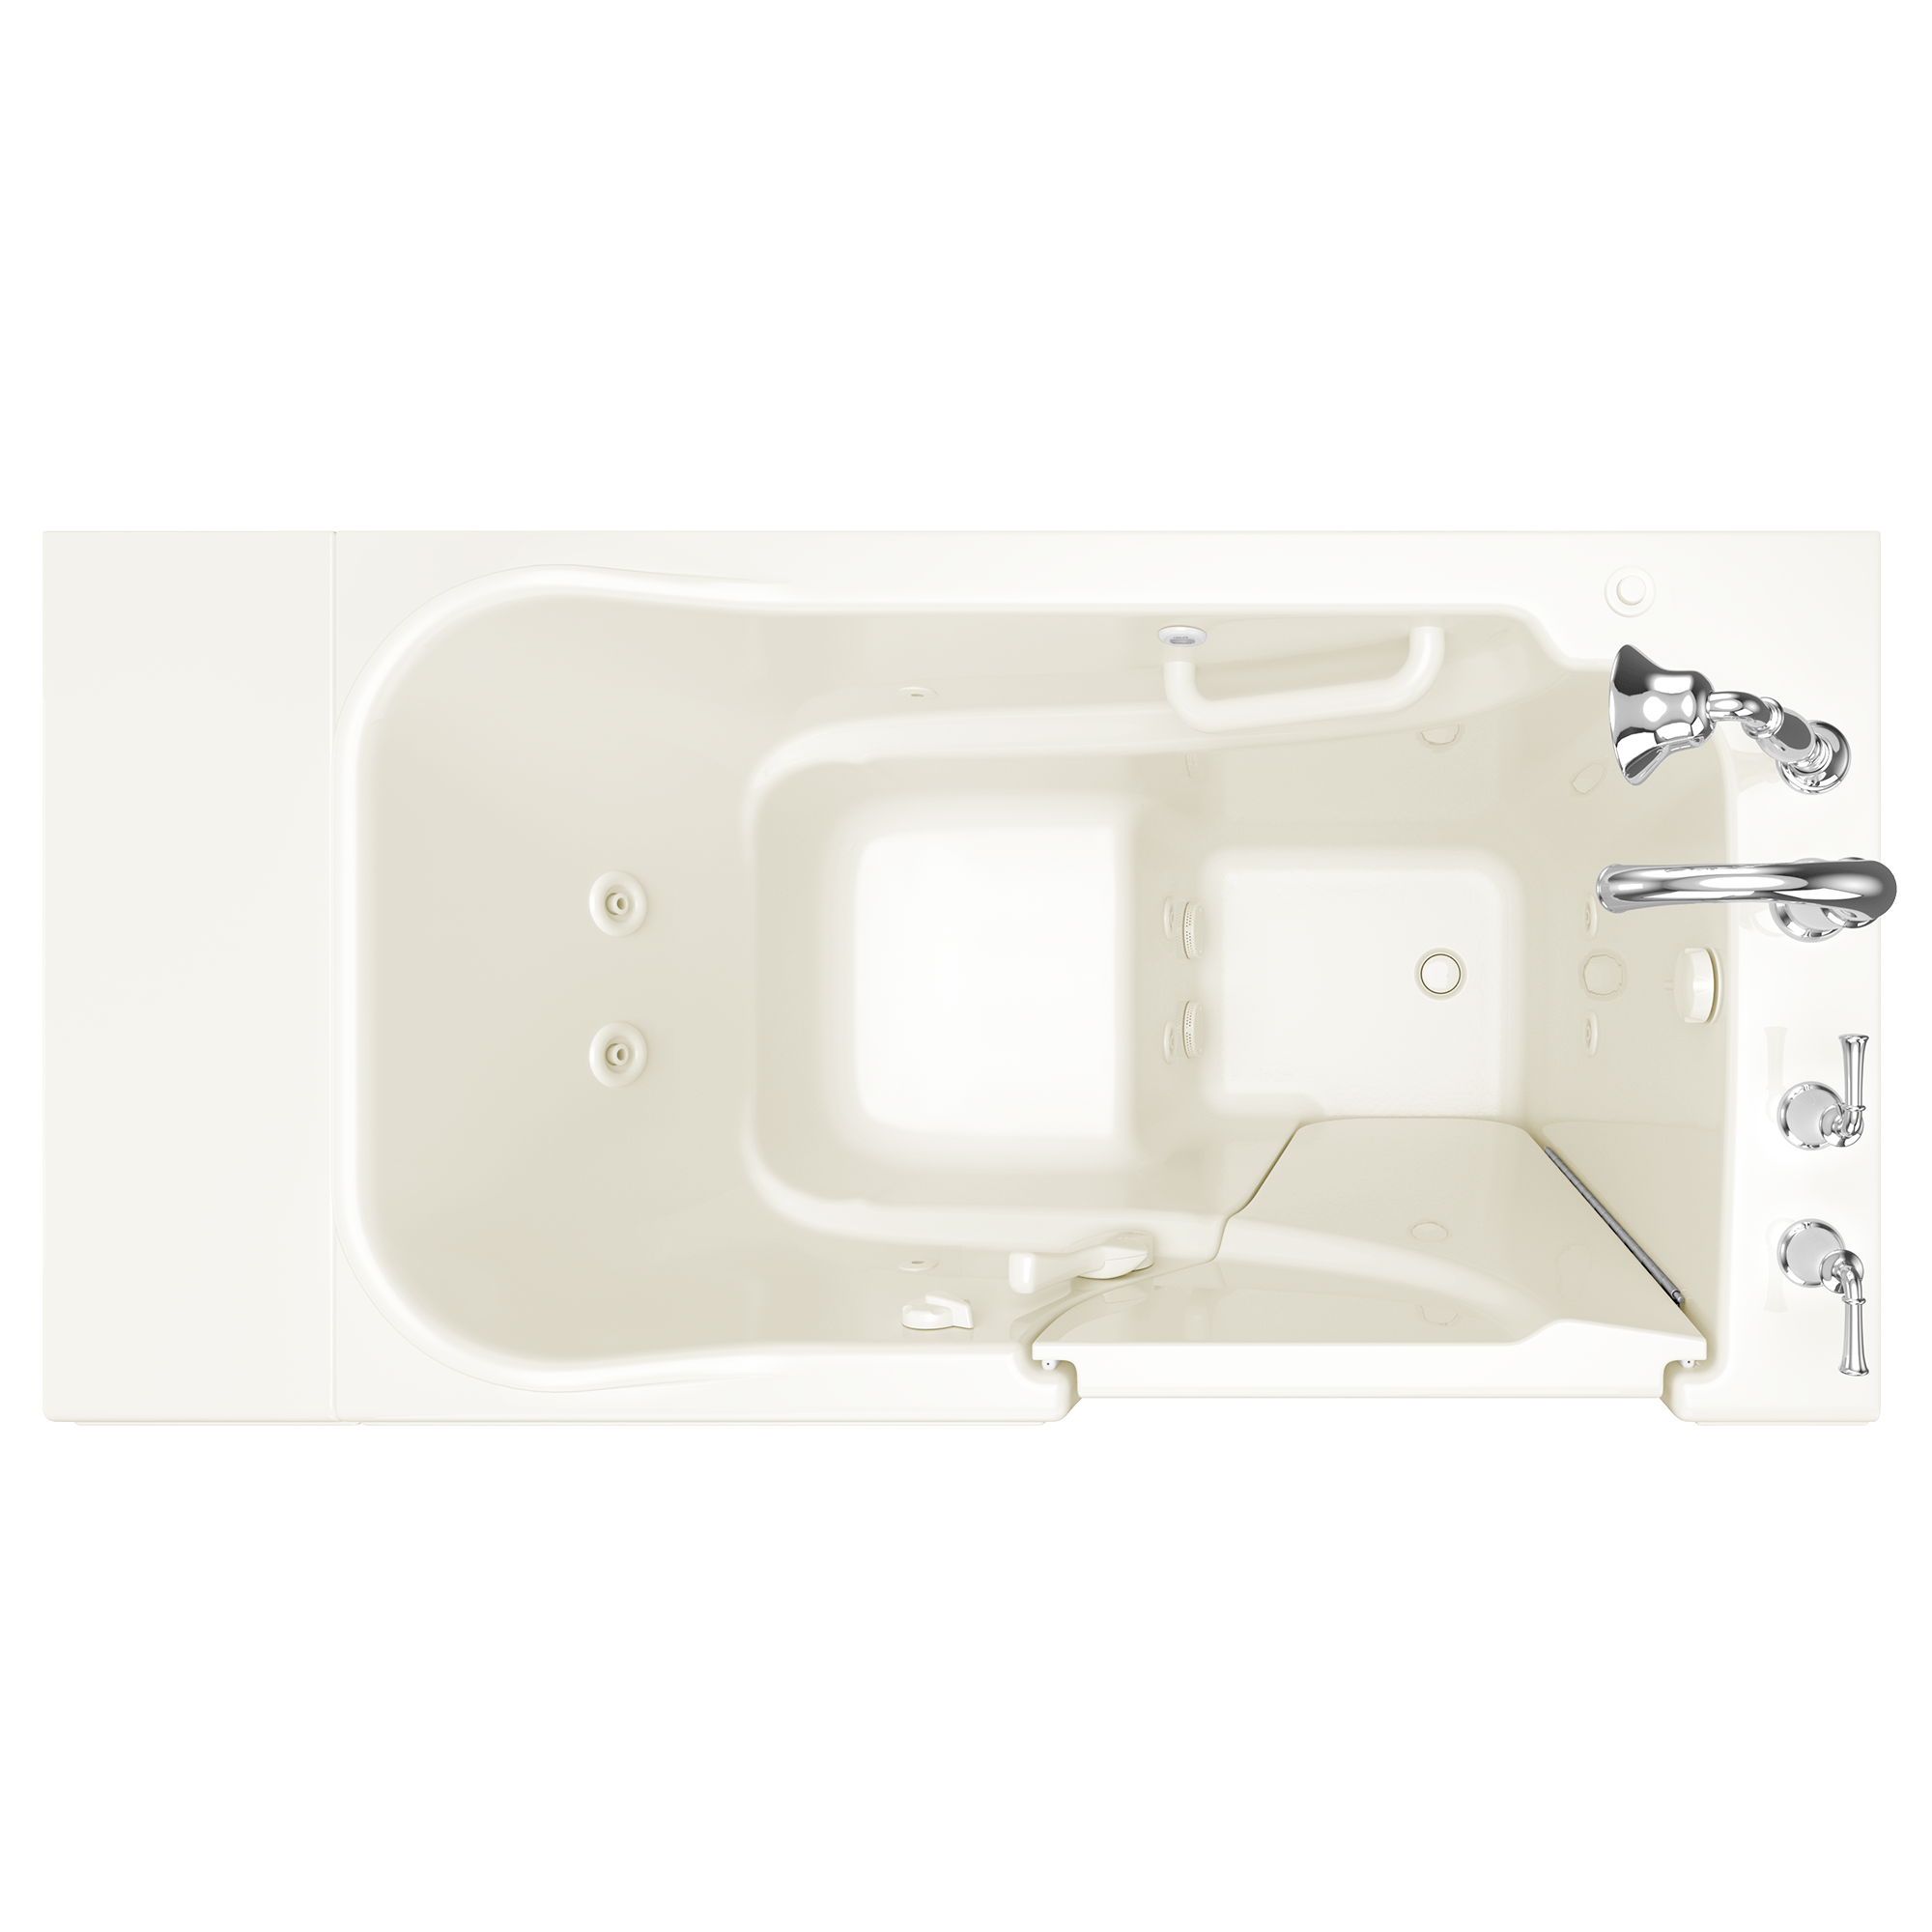 GEL Walk In Tub 52X30 Right Hand JMS Biscuit ST BISCUIT